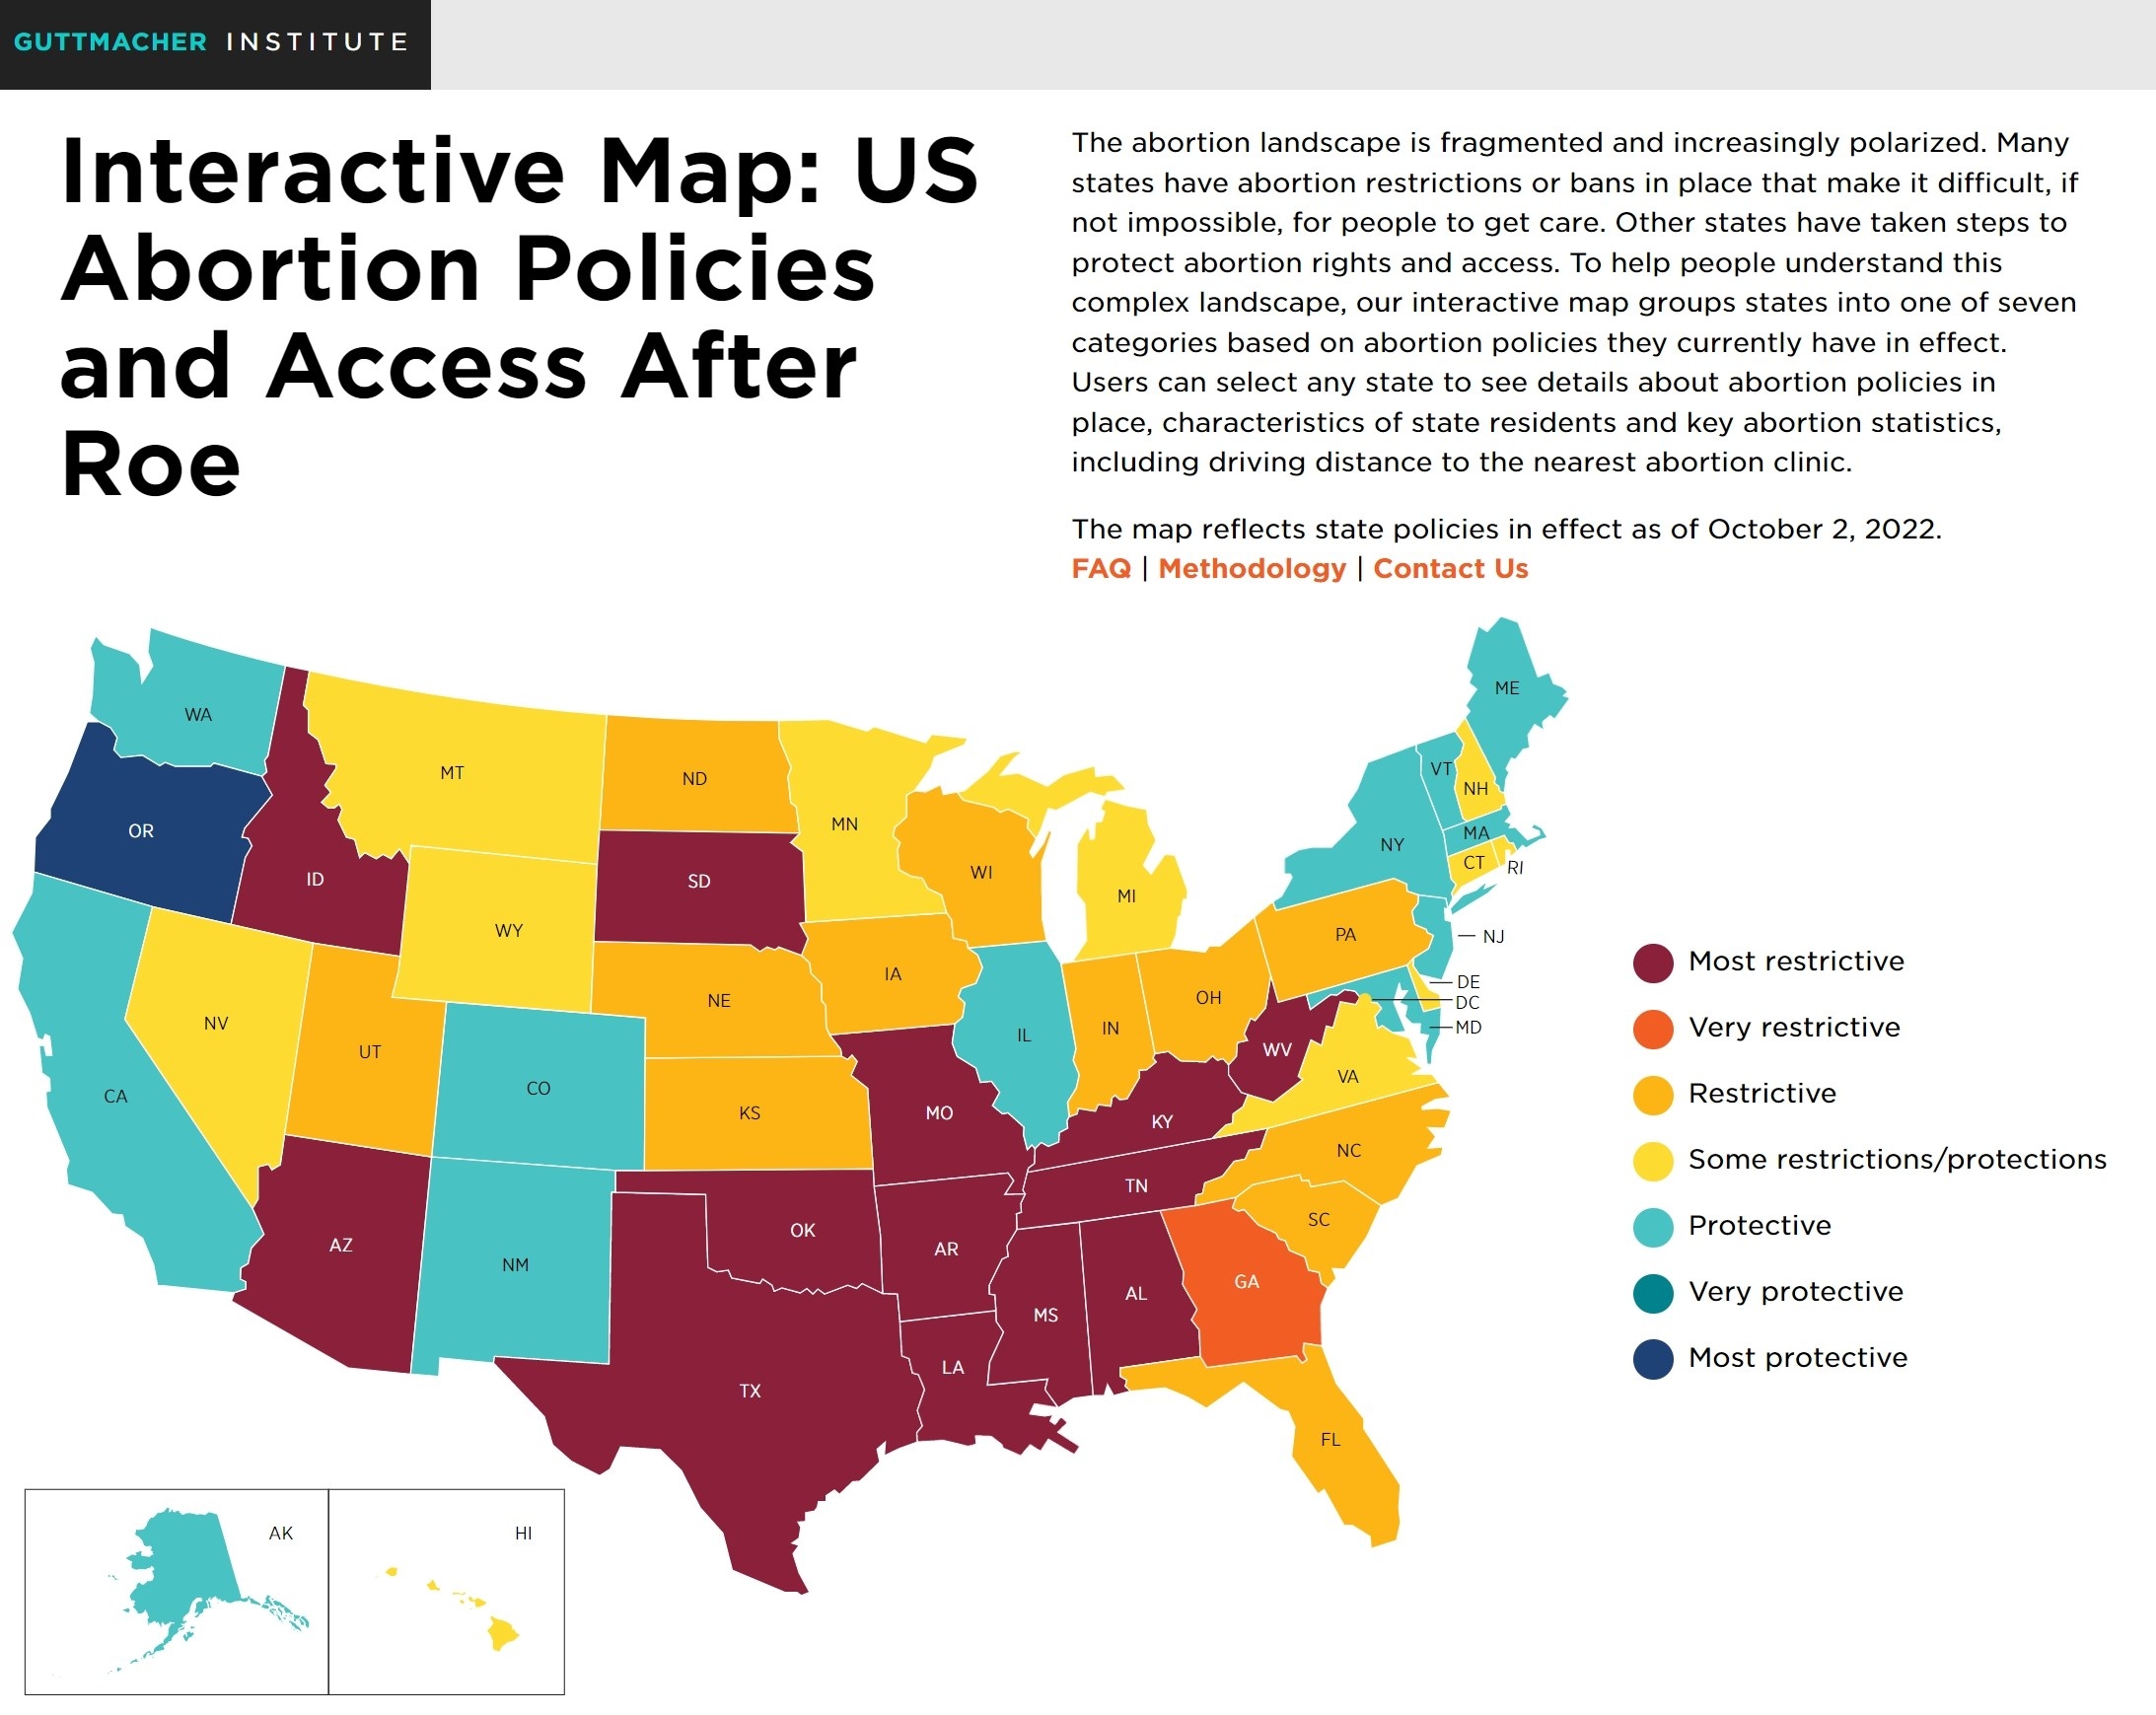 interactive map showing US abortion policies and access after Roe by the Guttmacher Institute